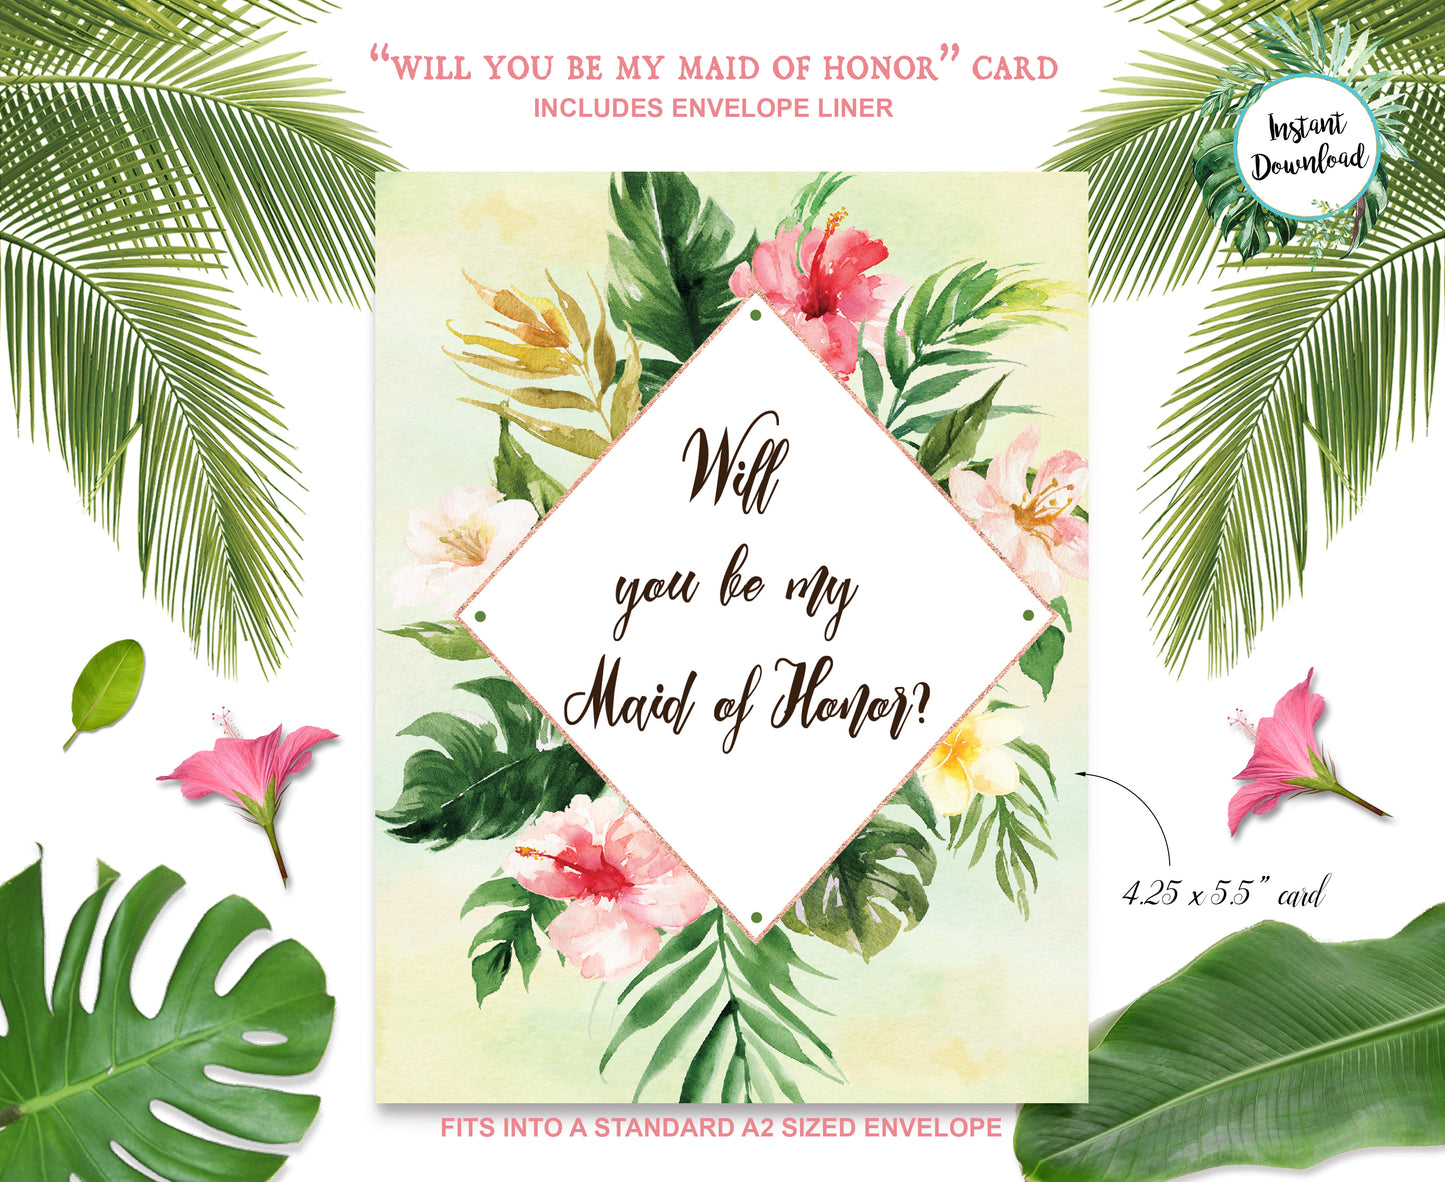 Tropical Floral Watercolor Beach Destination "Will you be my Maid of Honor" Digital "Instant Download" Invitation 2 - 'TROPICAL LUSH"